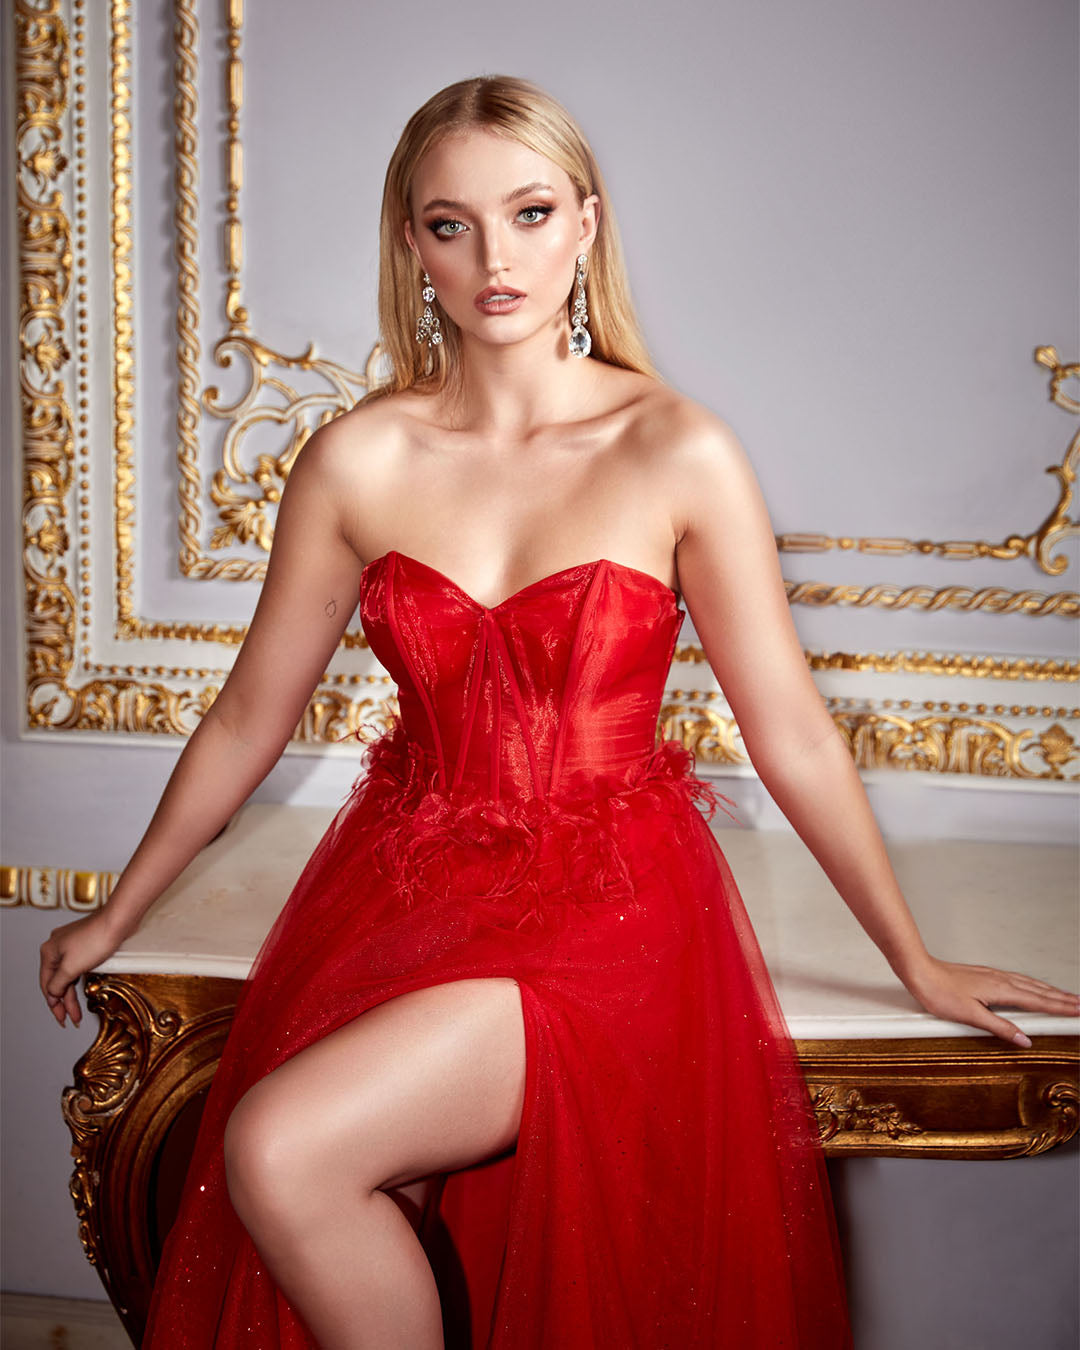 Strapless red corset prom dress with feather accents and high side slit.